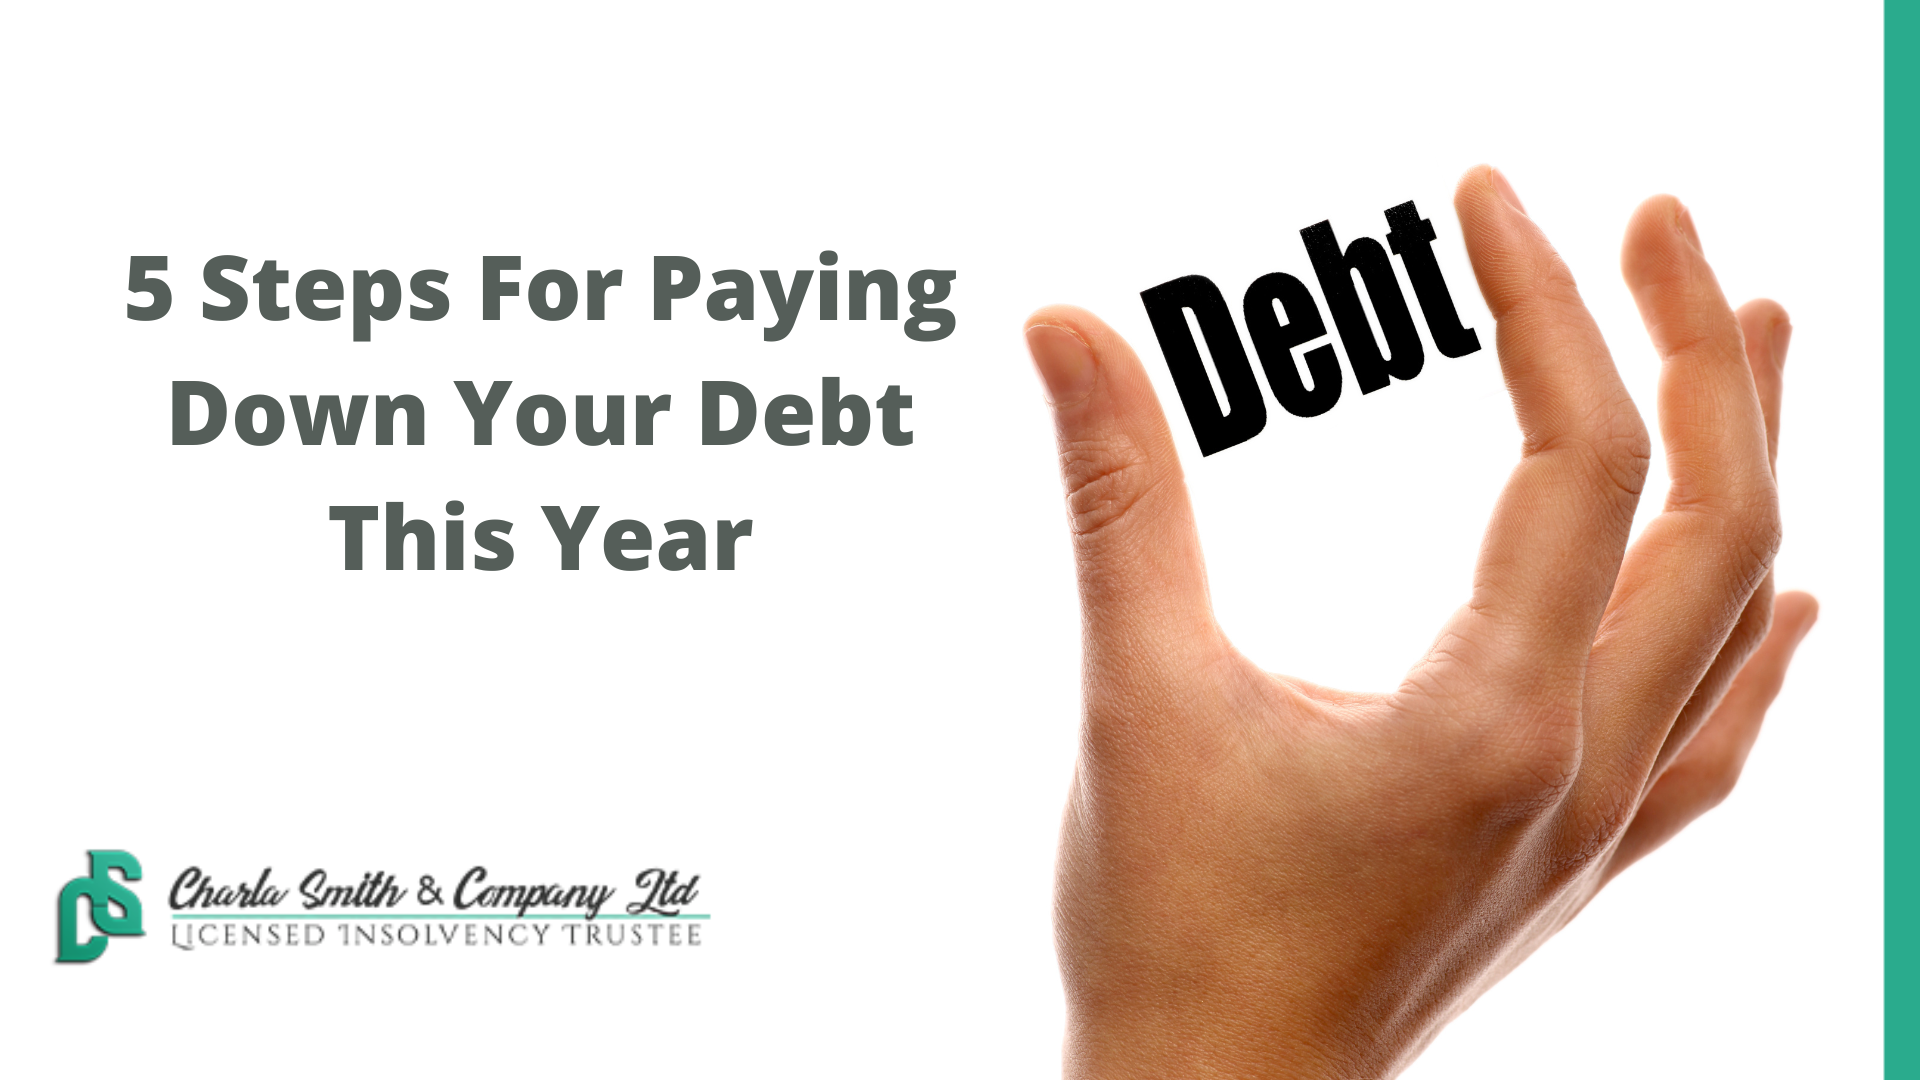 5 Steps For Paying Down Your Debt This Year